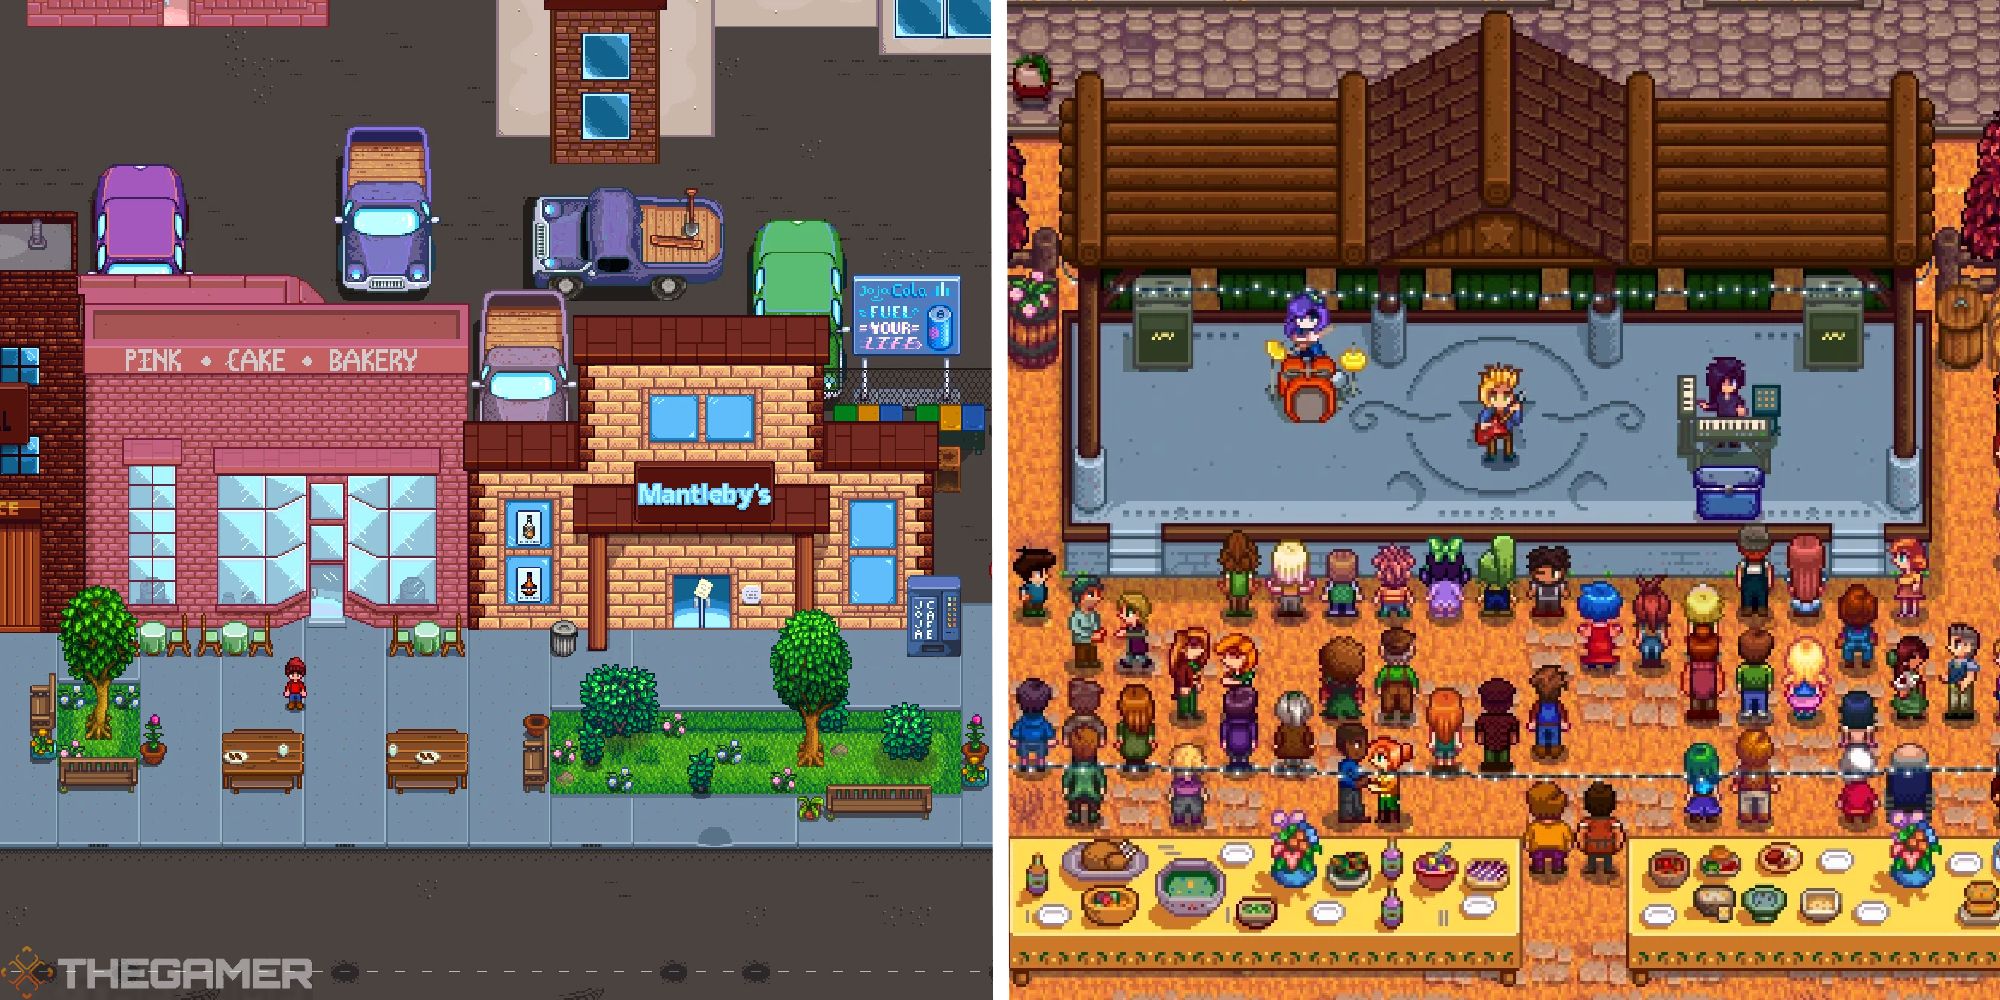 stardew valley split imge showing downtown zuzu mod next to image of ridgeside village mod showing sams band play at a festival